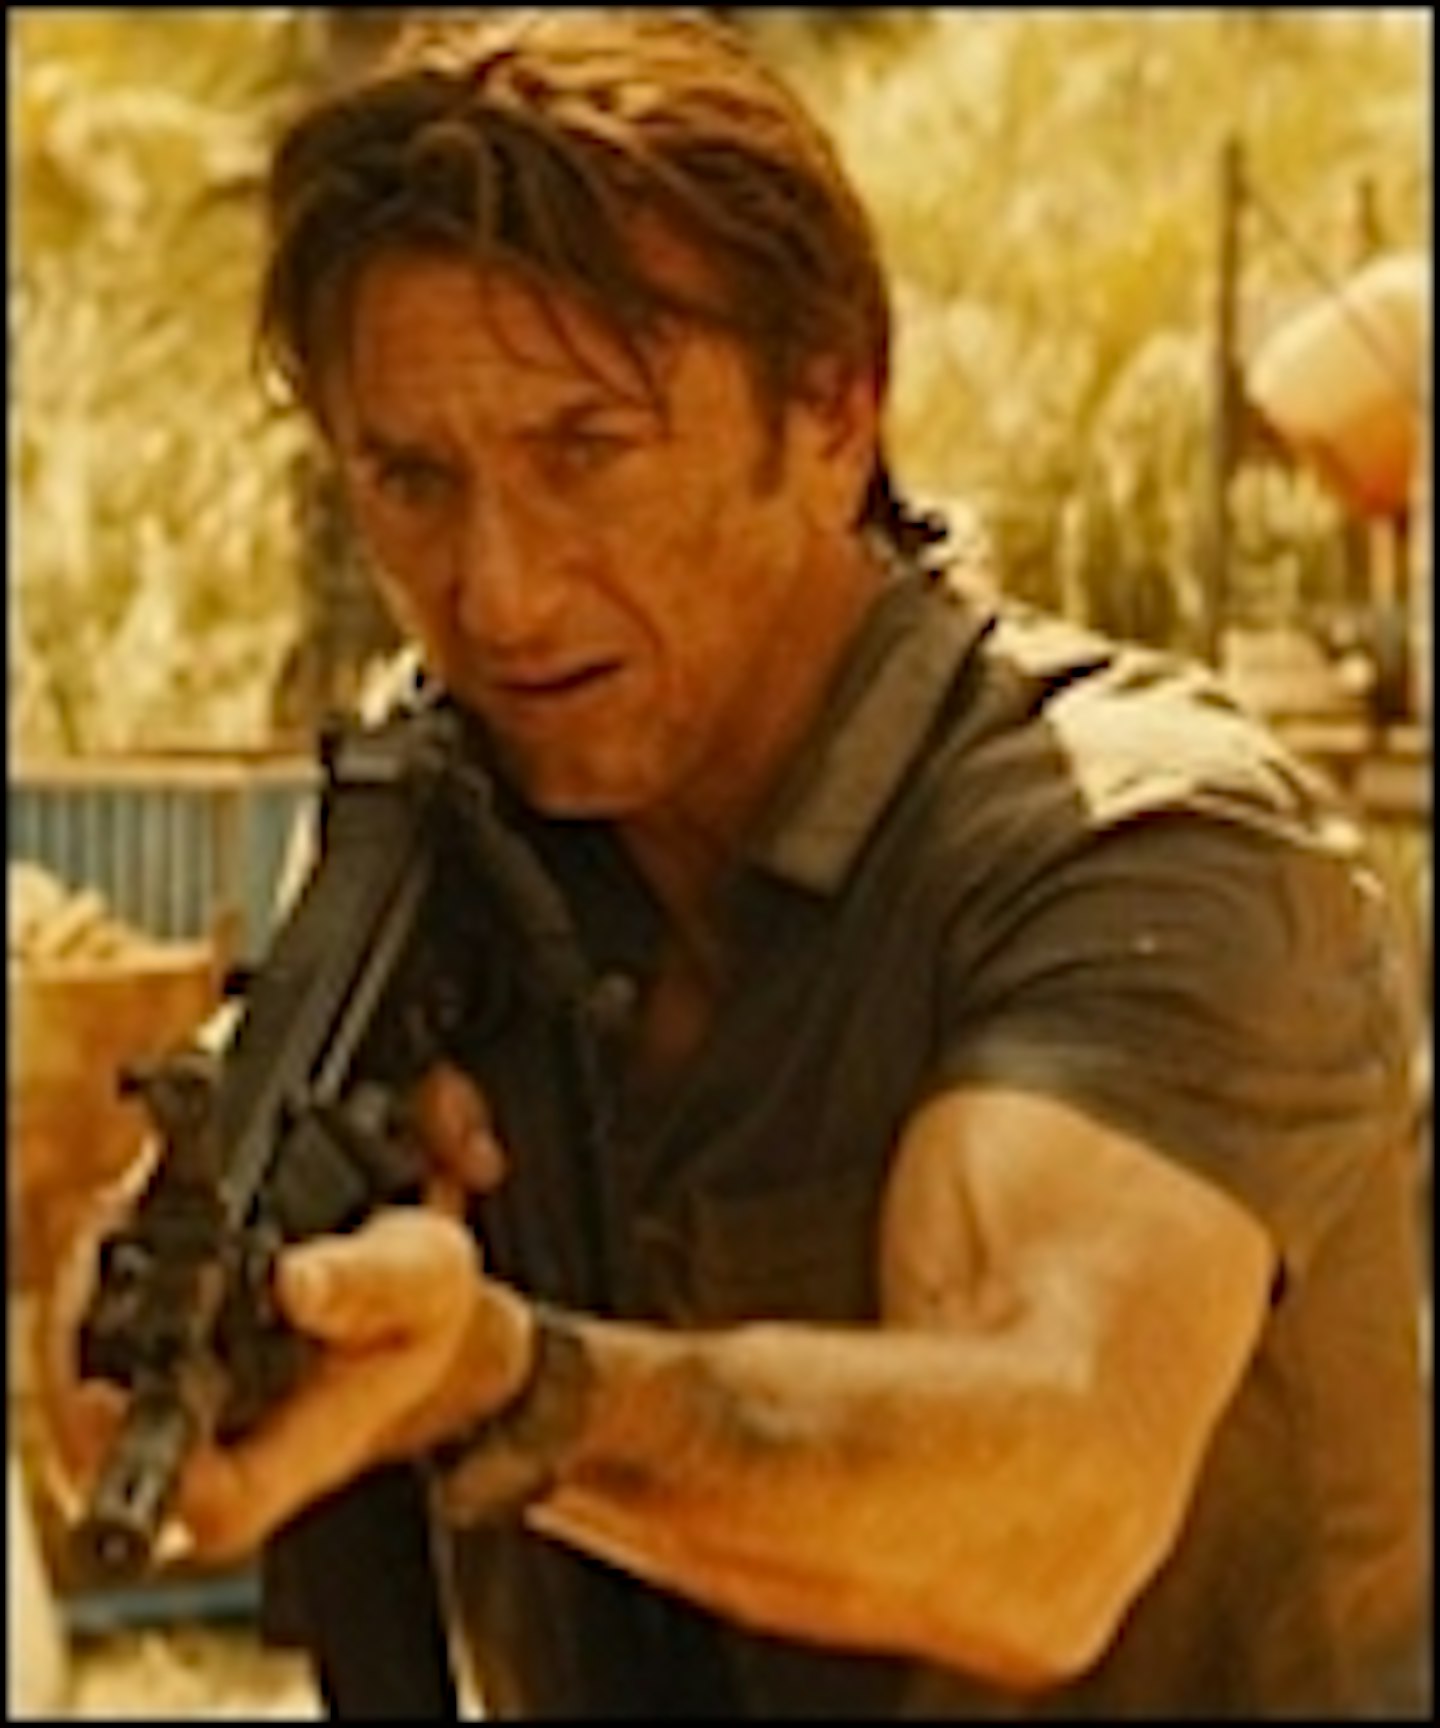 First Trailer For The Gunman Shoots In